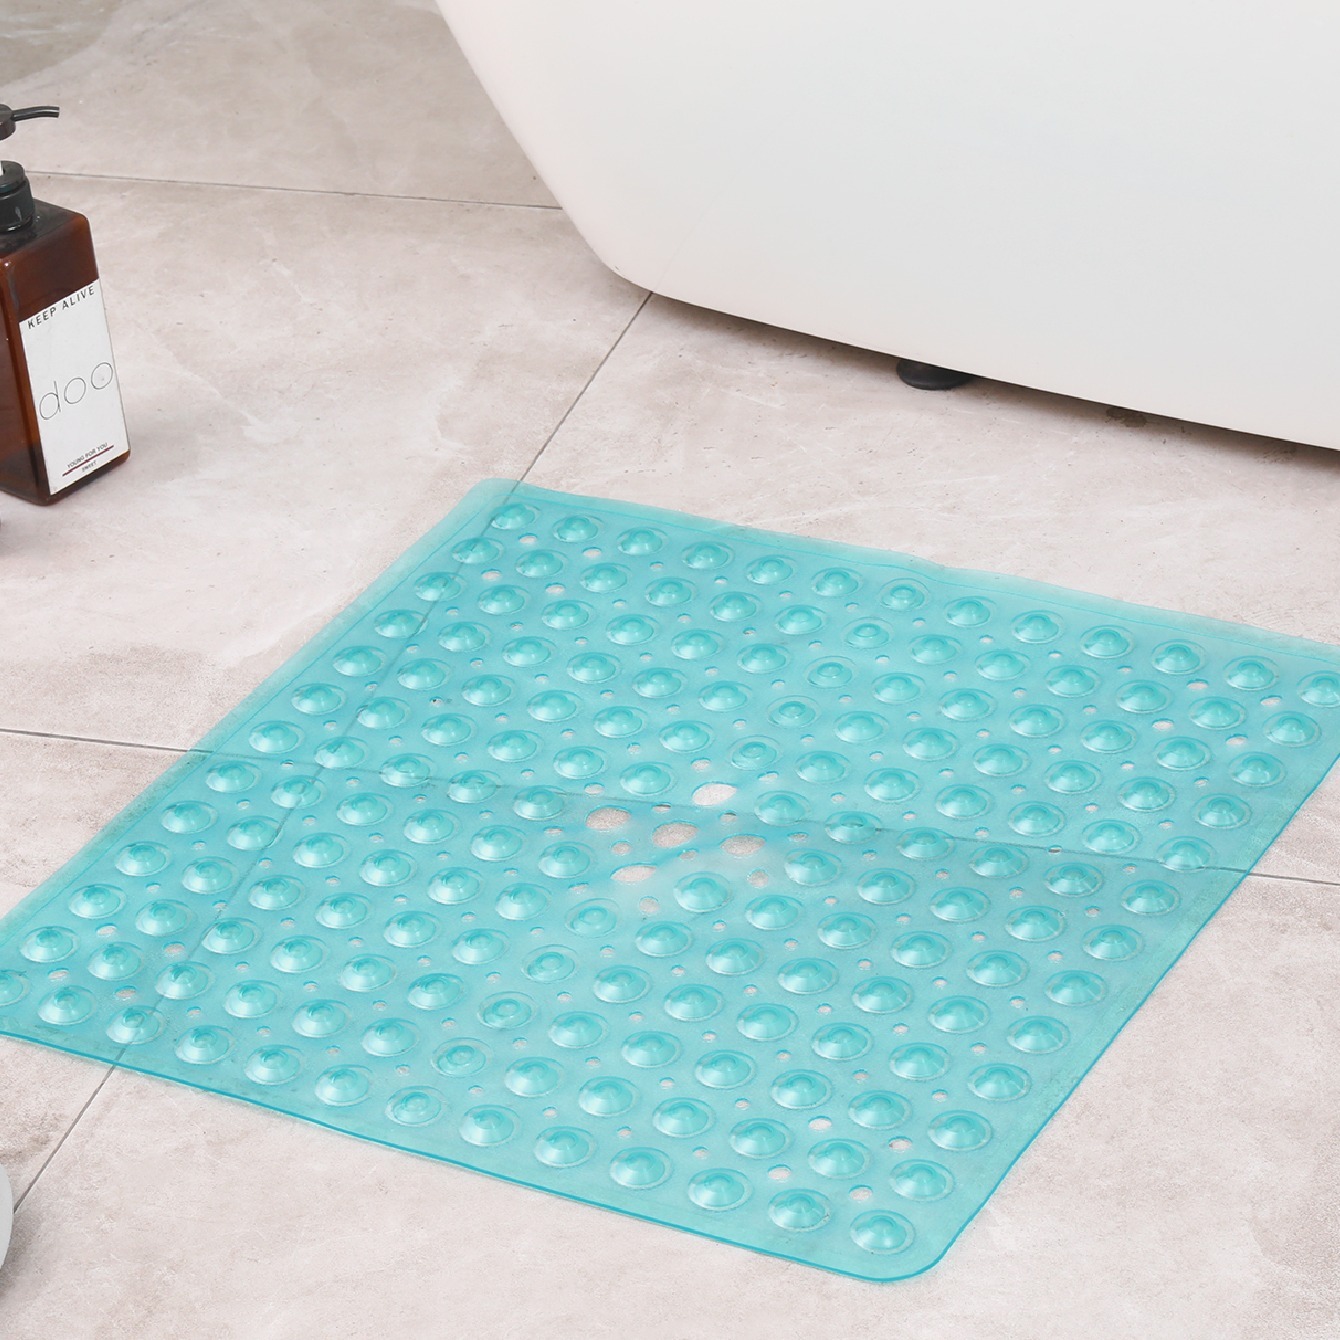 1pc Transparent Green Bathtub/shower Mat, Bathroom Anti-slip Mat With  Suction Cups And Drain Holes, Made Of Soft Pvc Material. Suitable For  Preventing Slipping Inside The Bathtub/shower, Multiple Colors Available